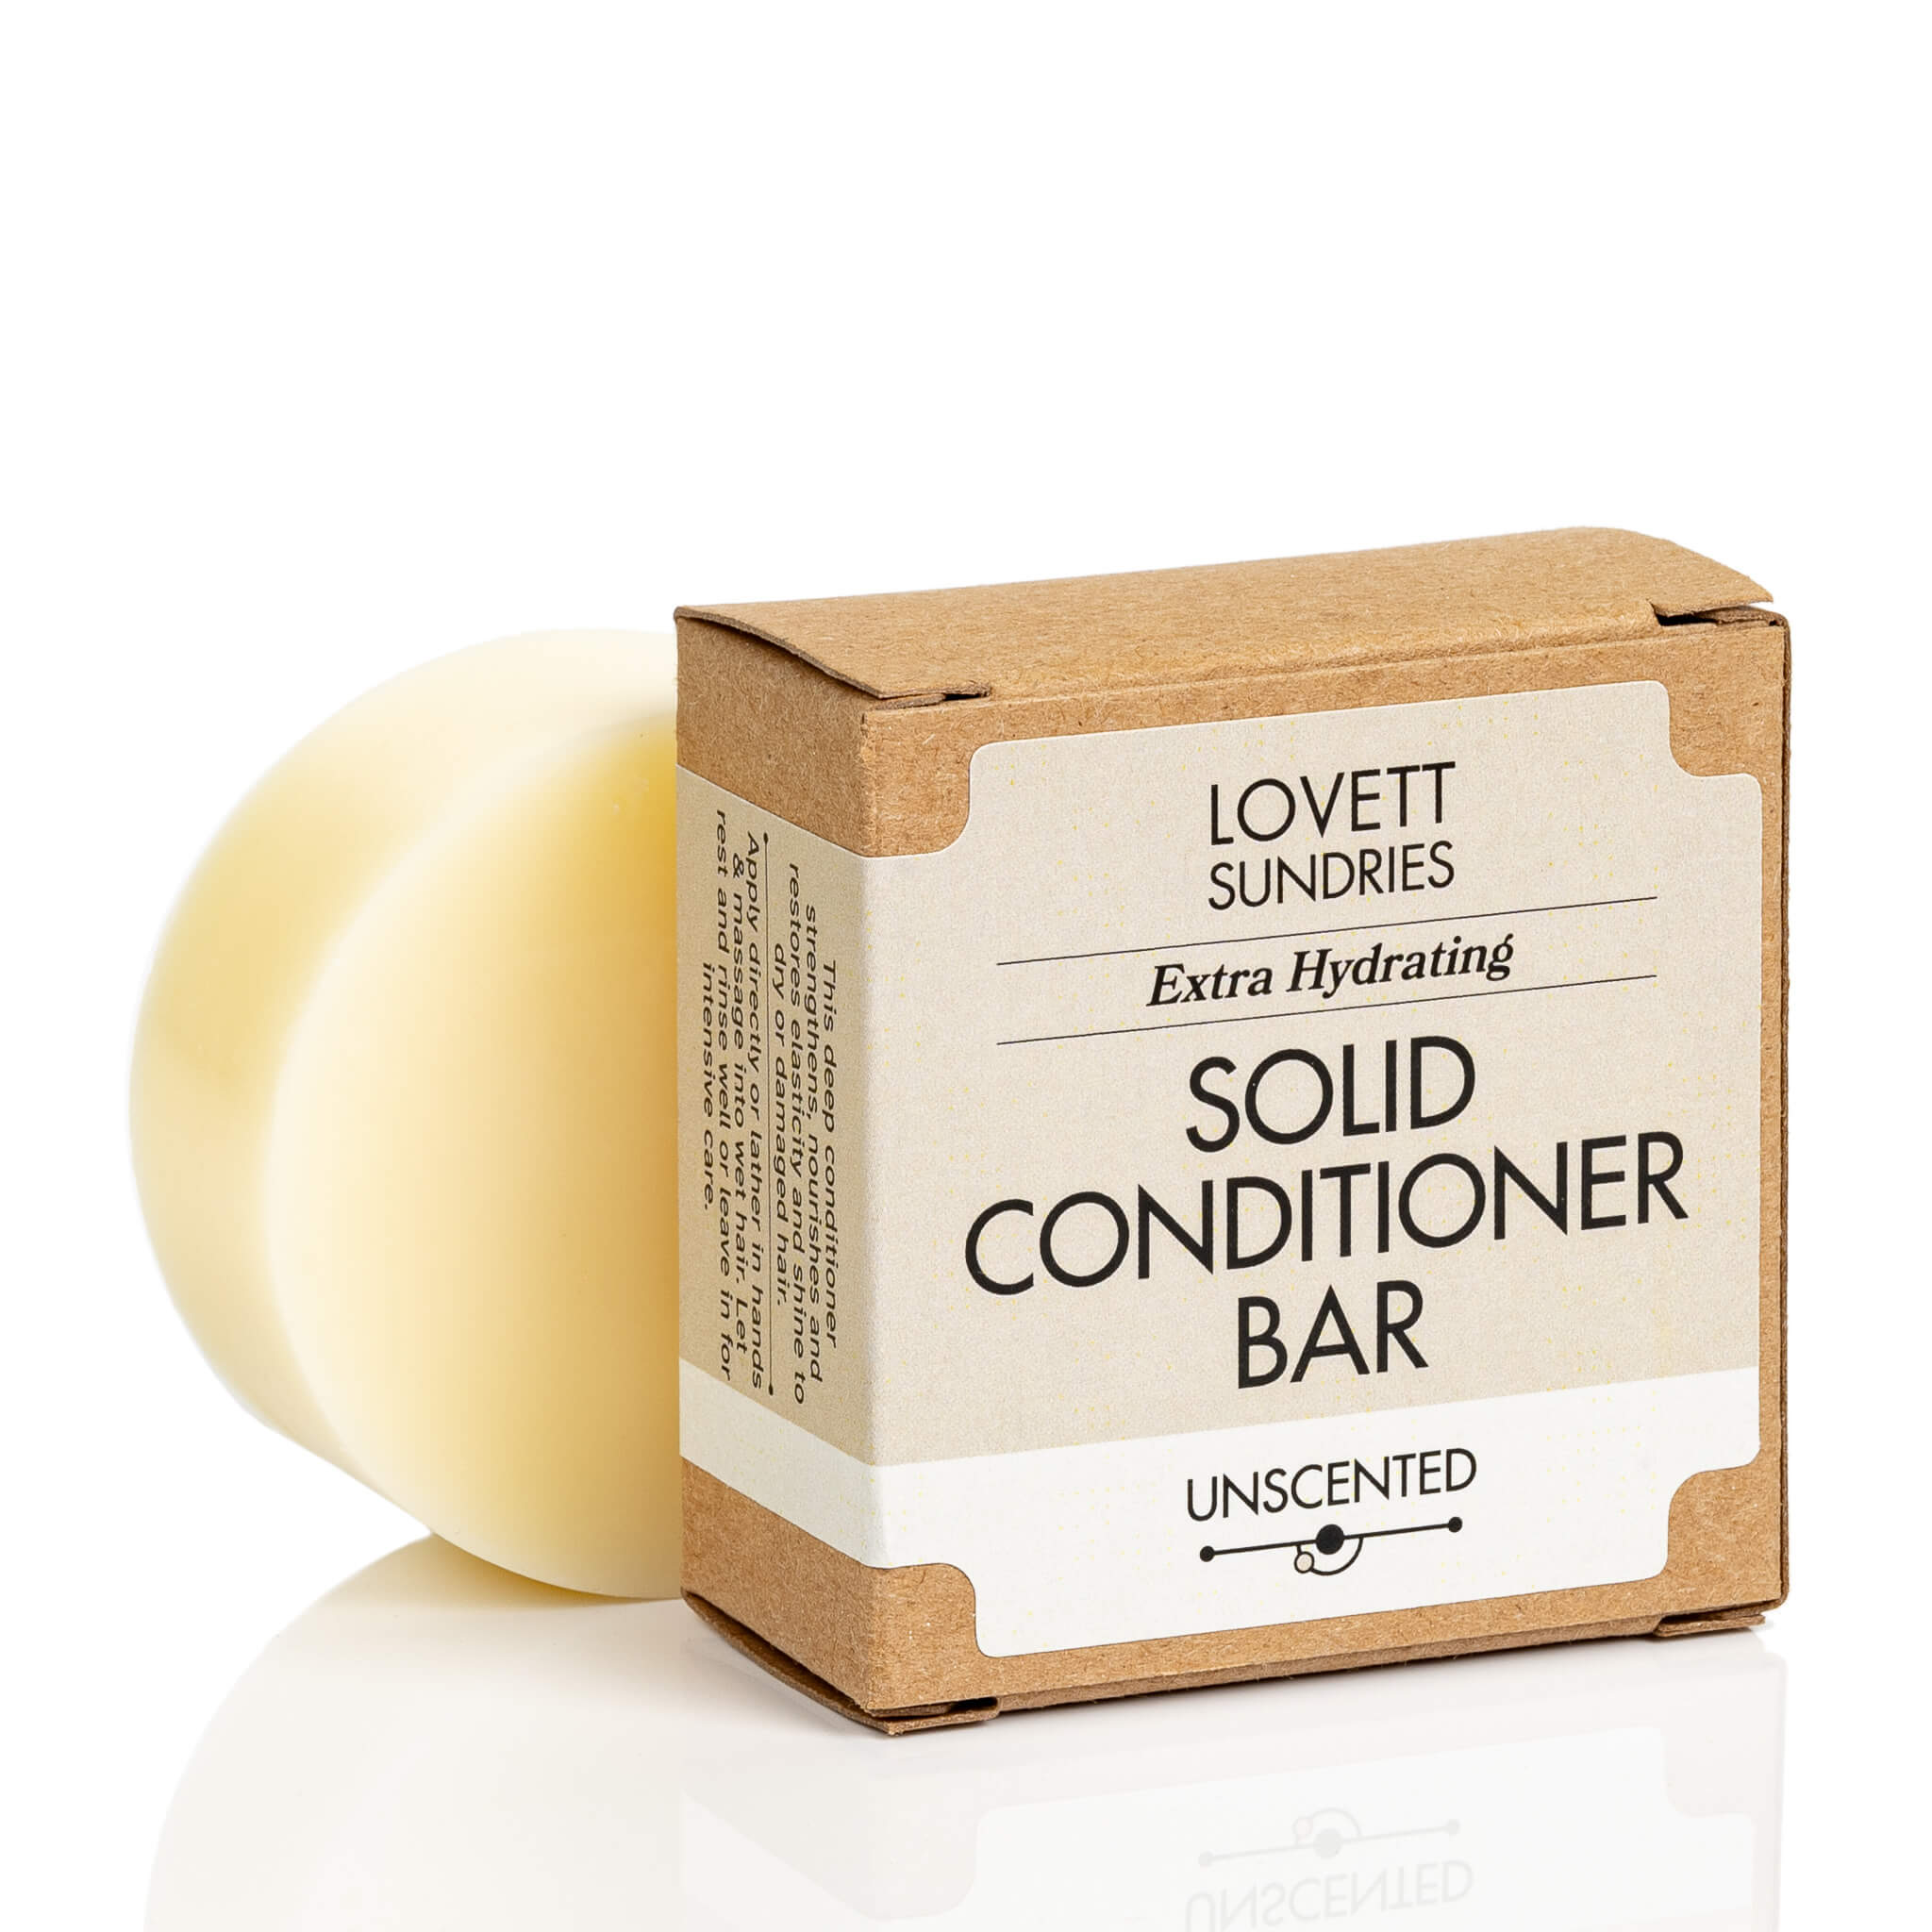 Unscented all natural extra hydrating solid conditioner bar in a recyclable paper box. 